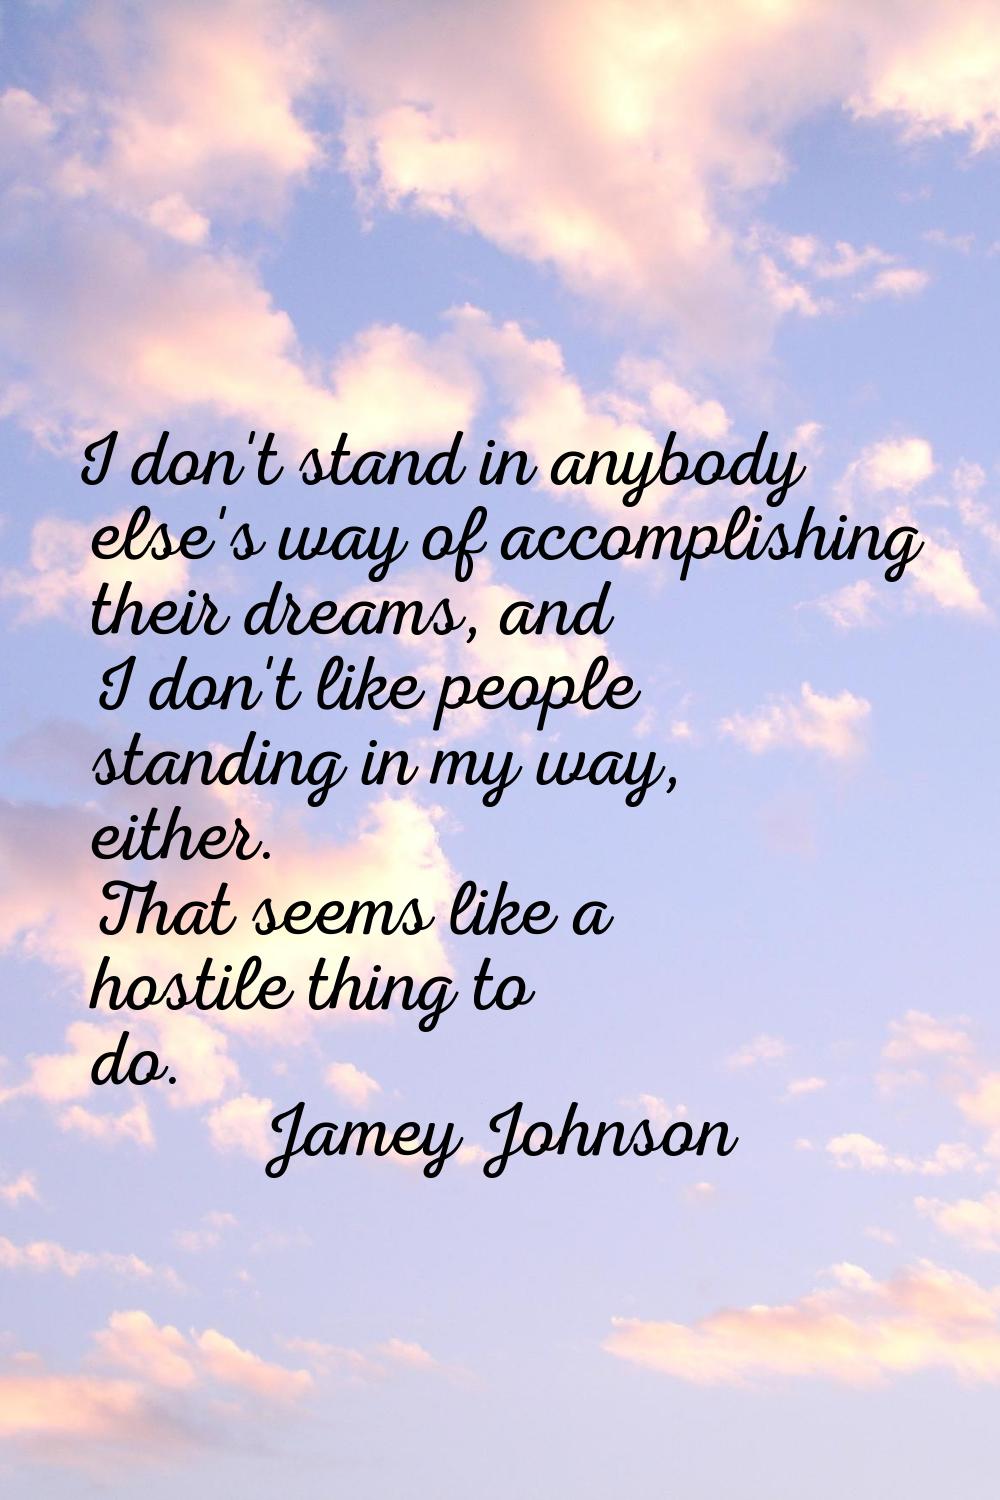 I don't stand in anybody else's way of accomplishing their dreams, and I don't like people standing